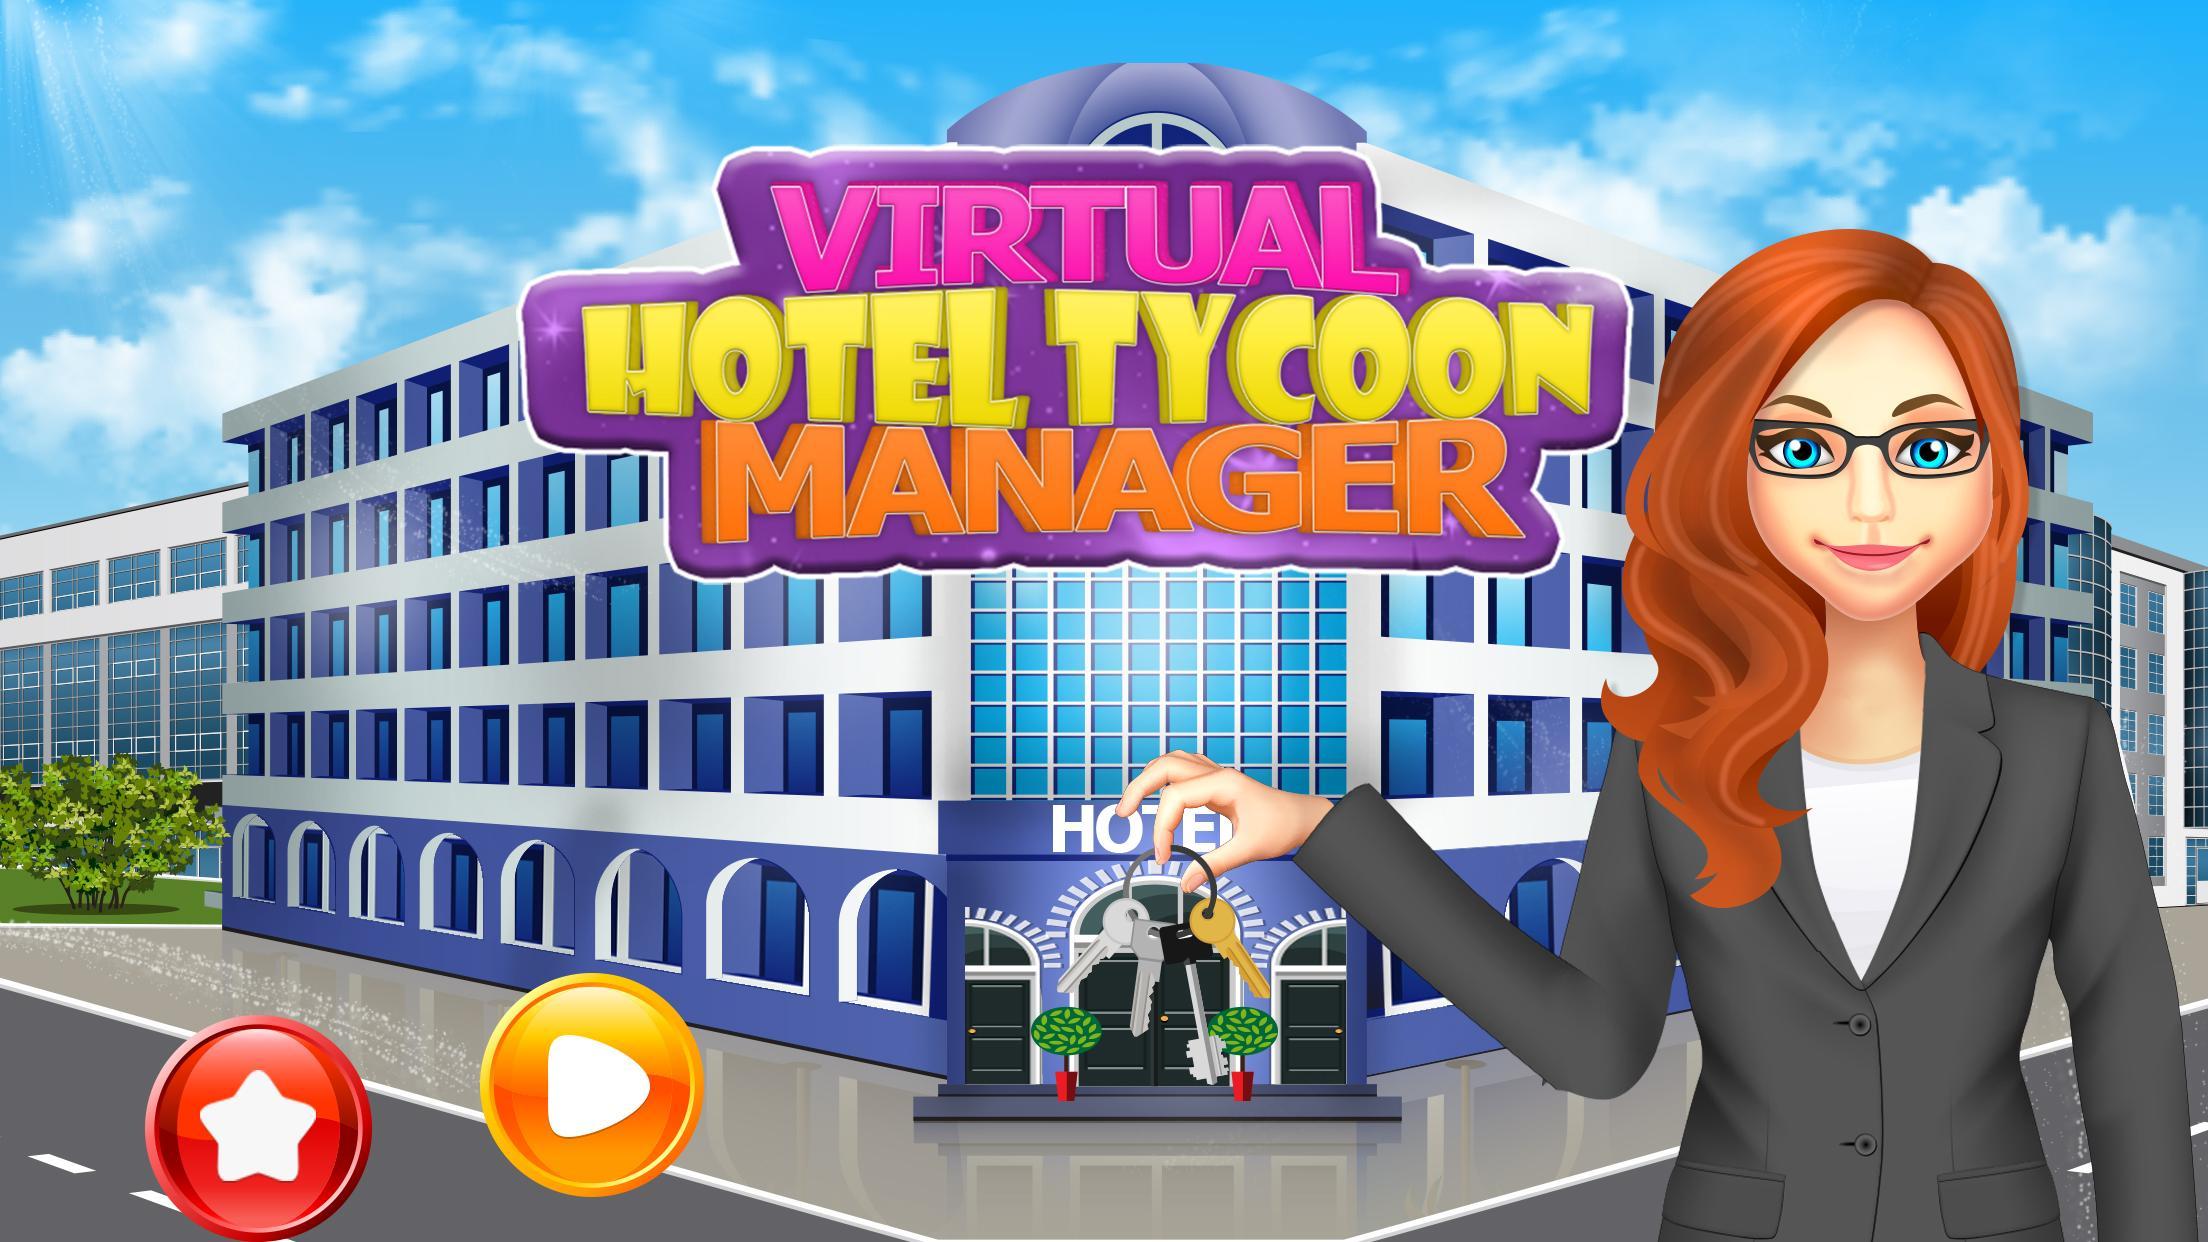 Virtual Hotel Tycoon Manager For Android Apk Download - retail tycoon 1 service with a smile roblox retail tycoon